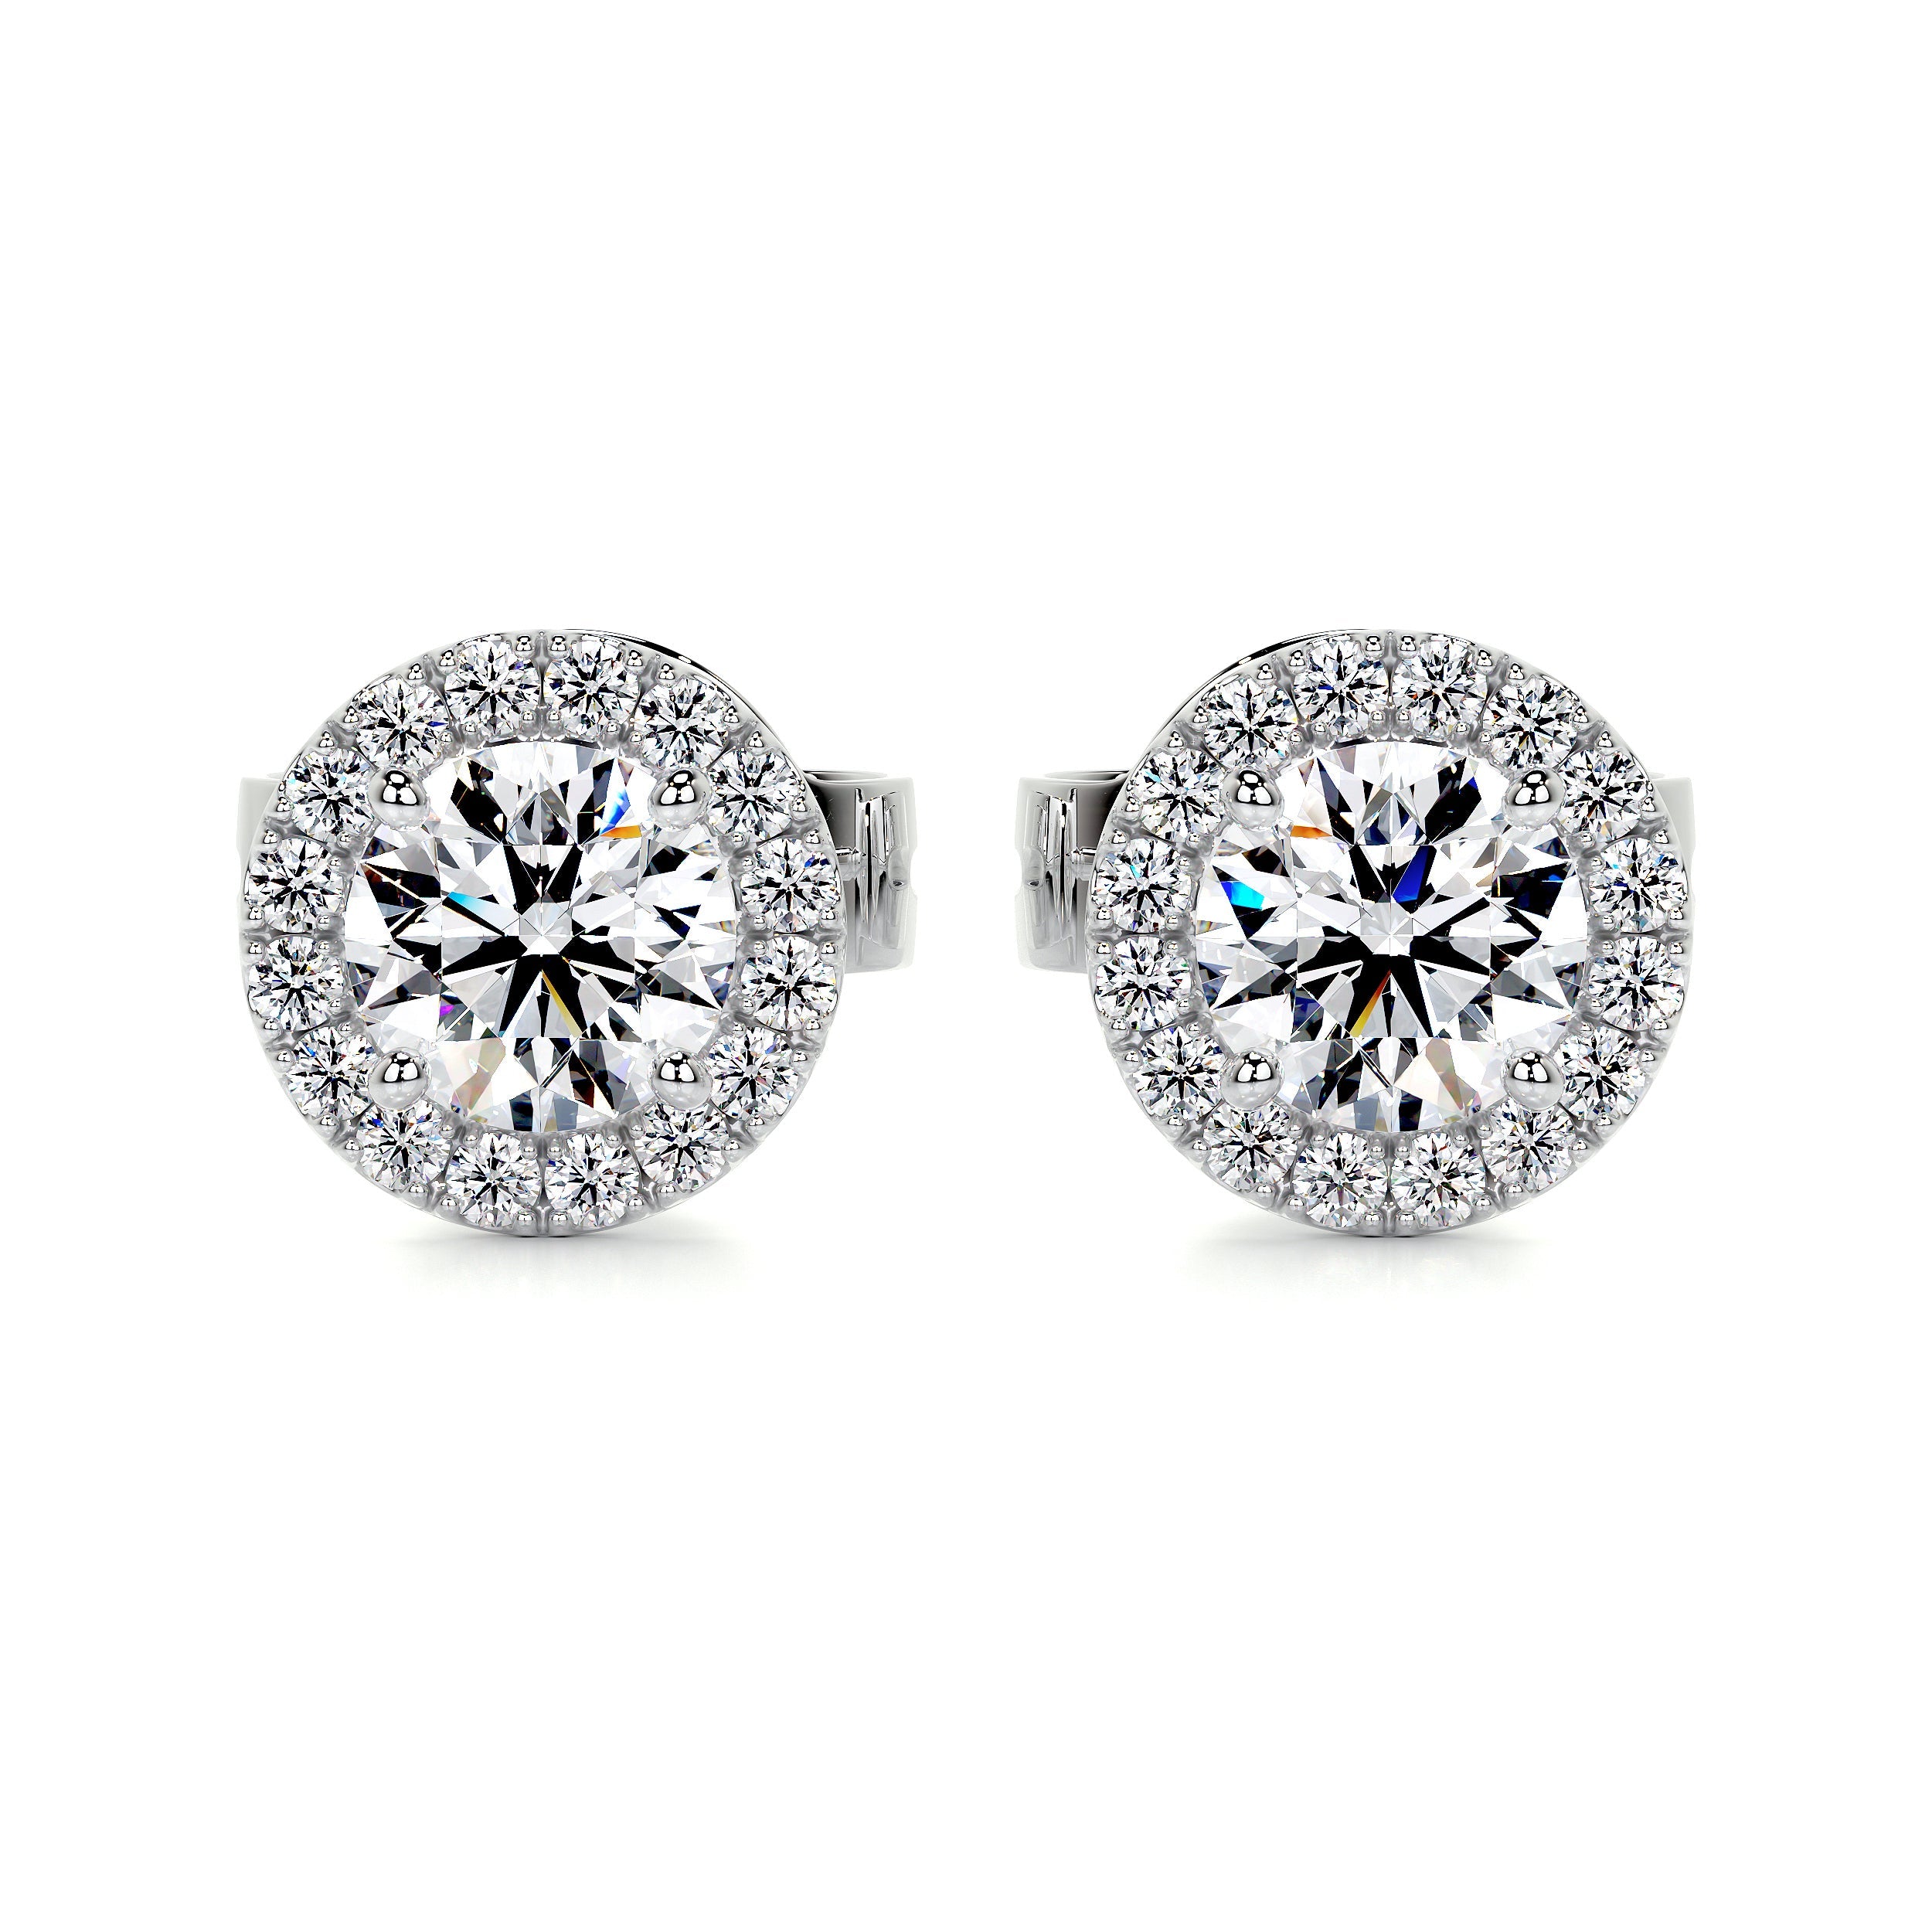 Solitaire earrings with 2.00 carat diamonds in white gold - BAUNAT